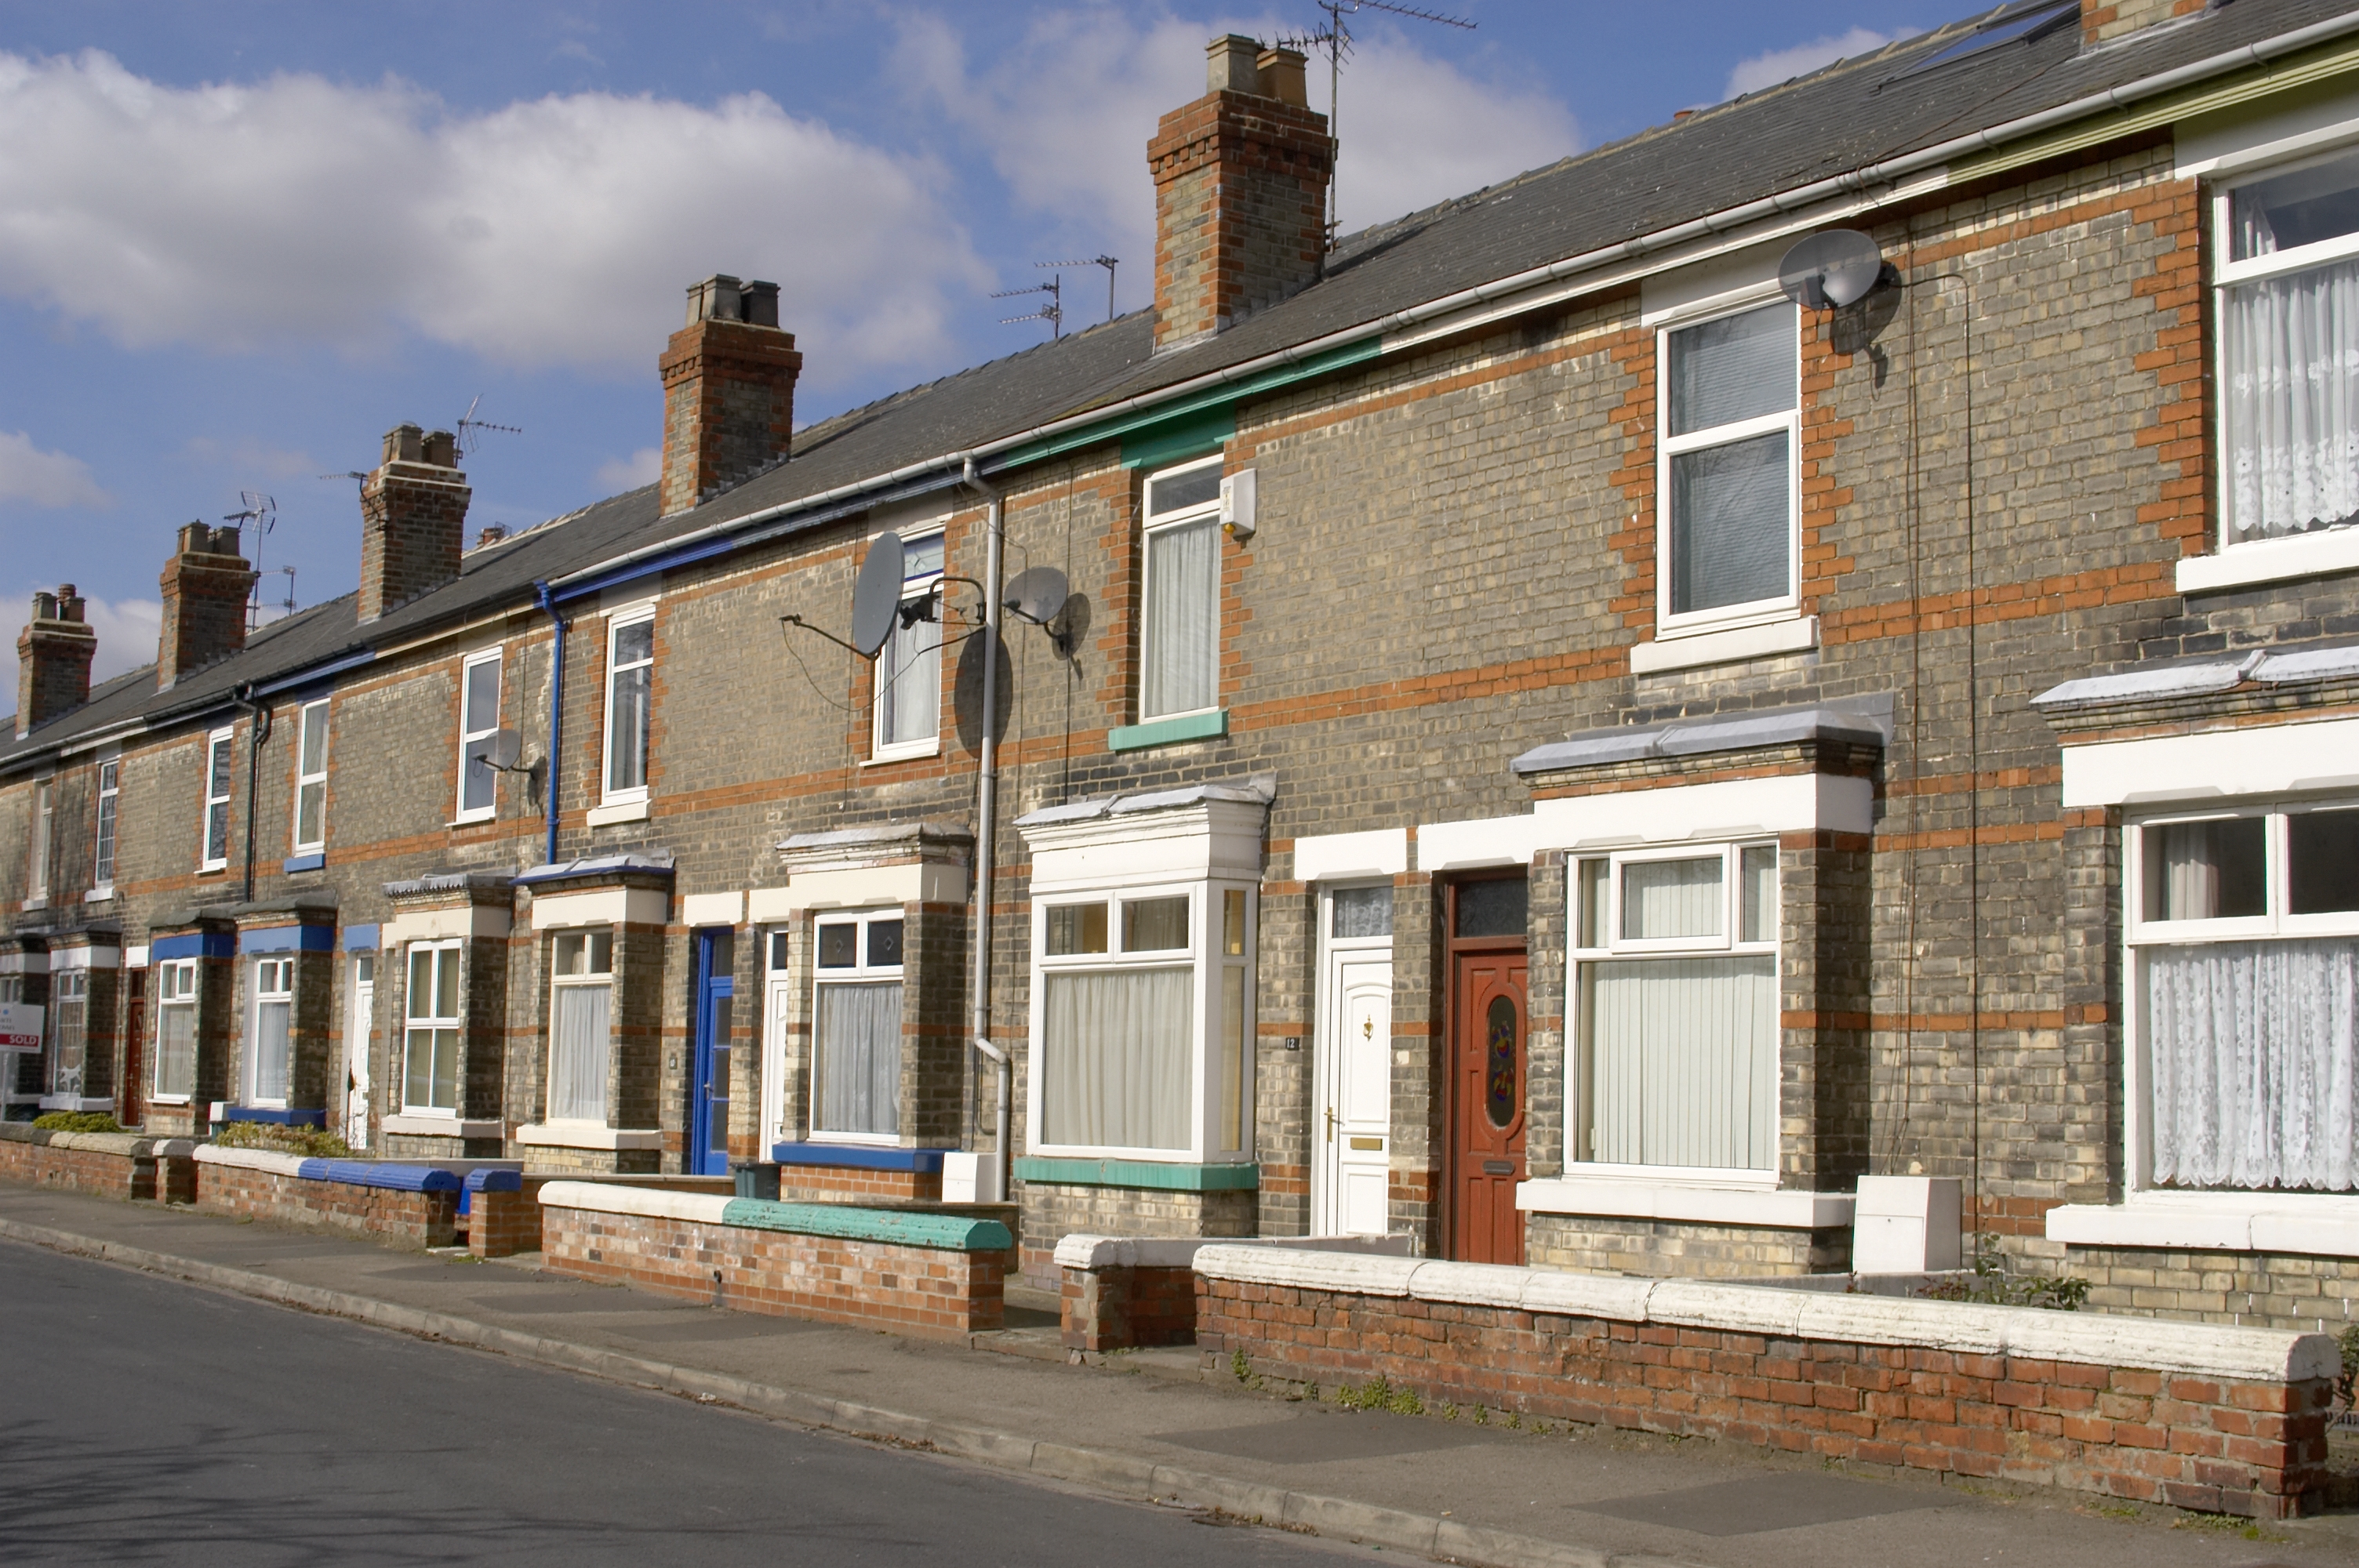 A row of old terraced houses, Selby, UK.; Shutterstock ID 1111762; Purchase Order: na